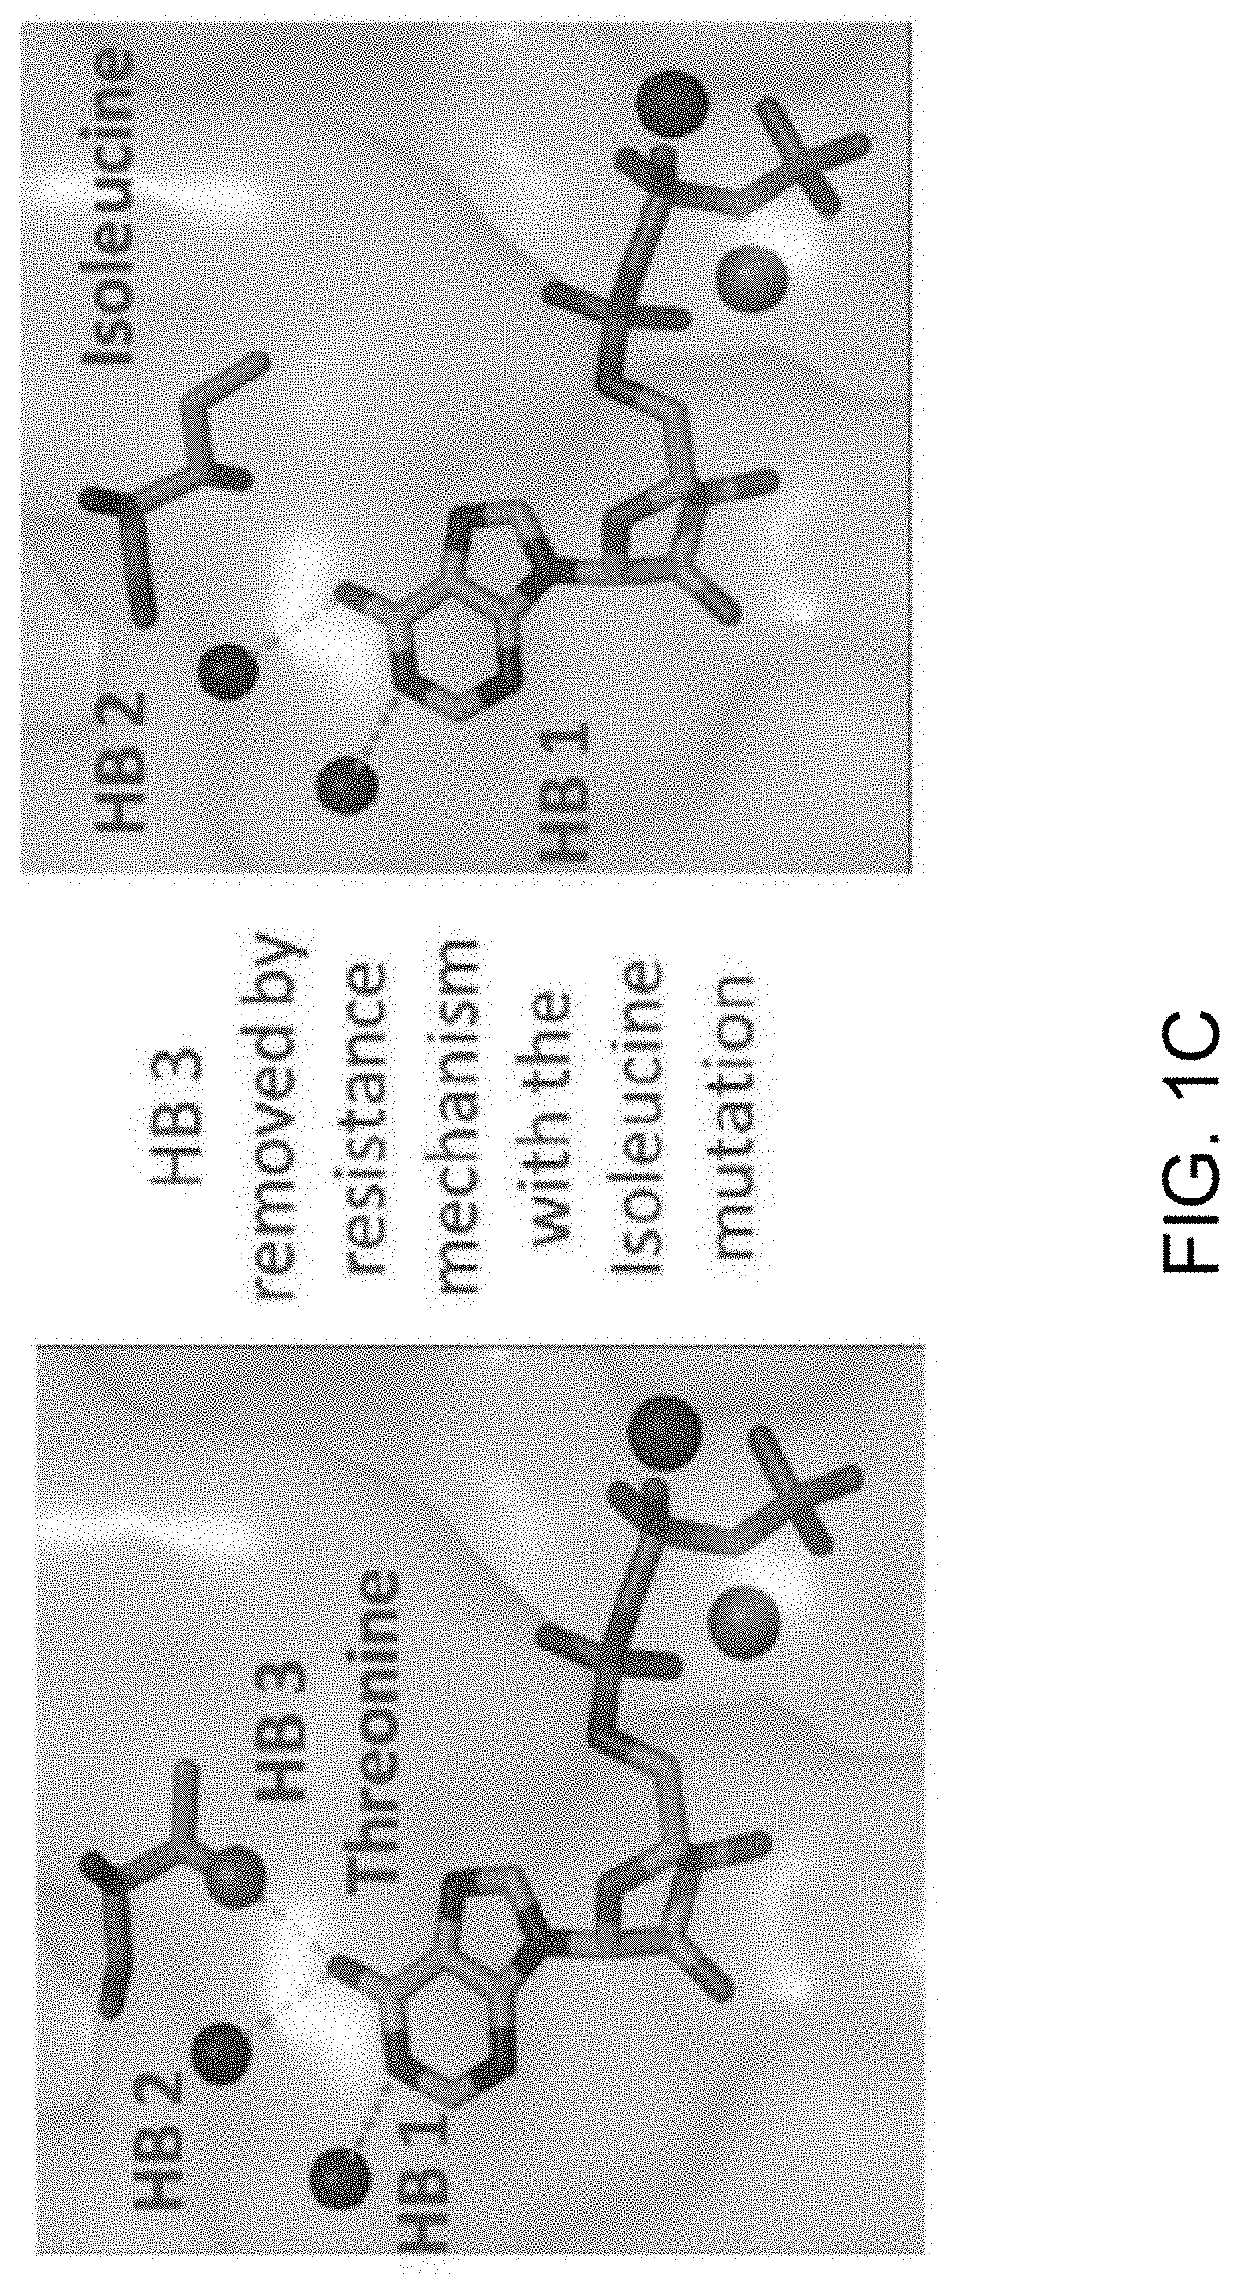 Methods and systems for determination of an effective therapeutic regimen and drug discovery